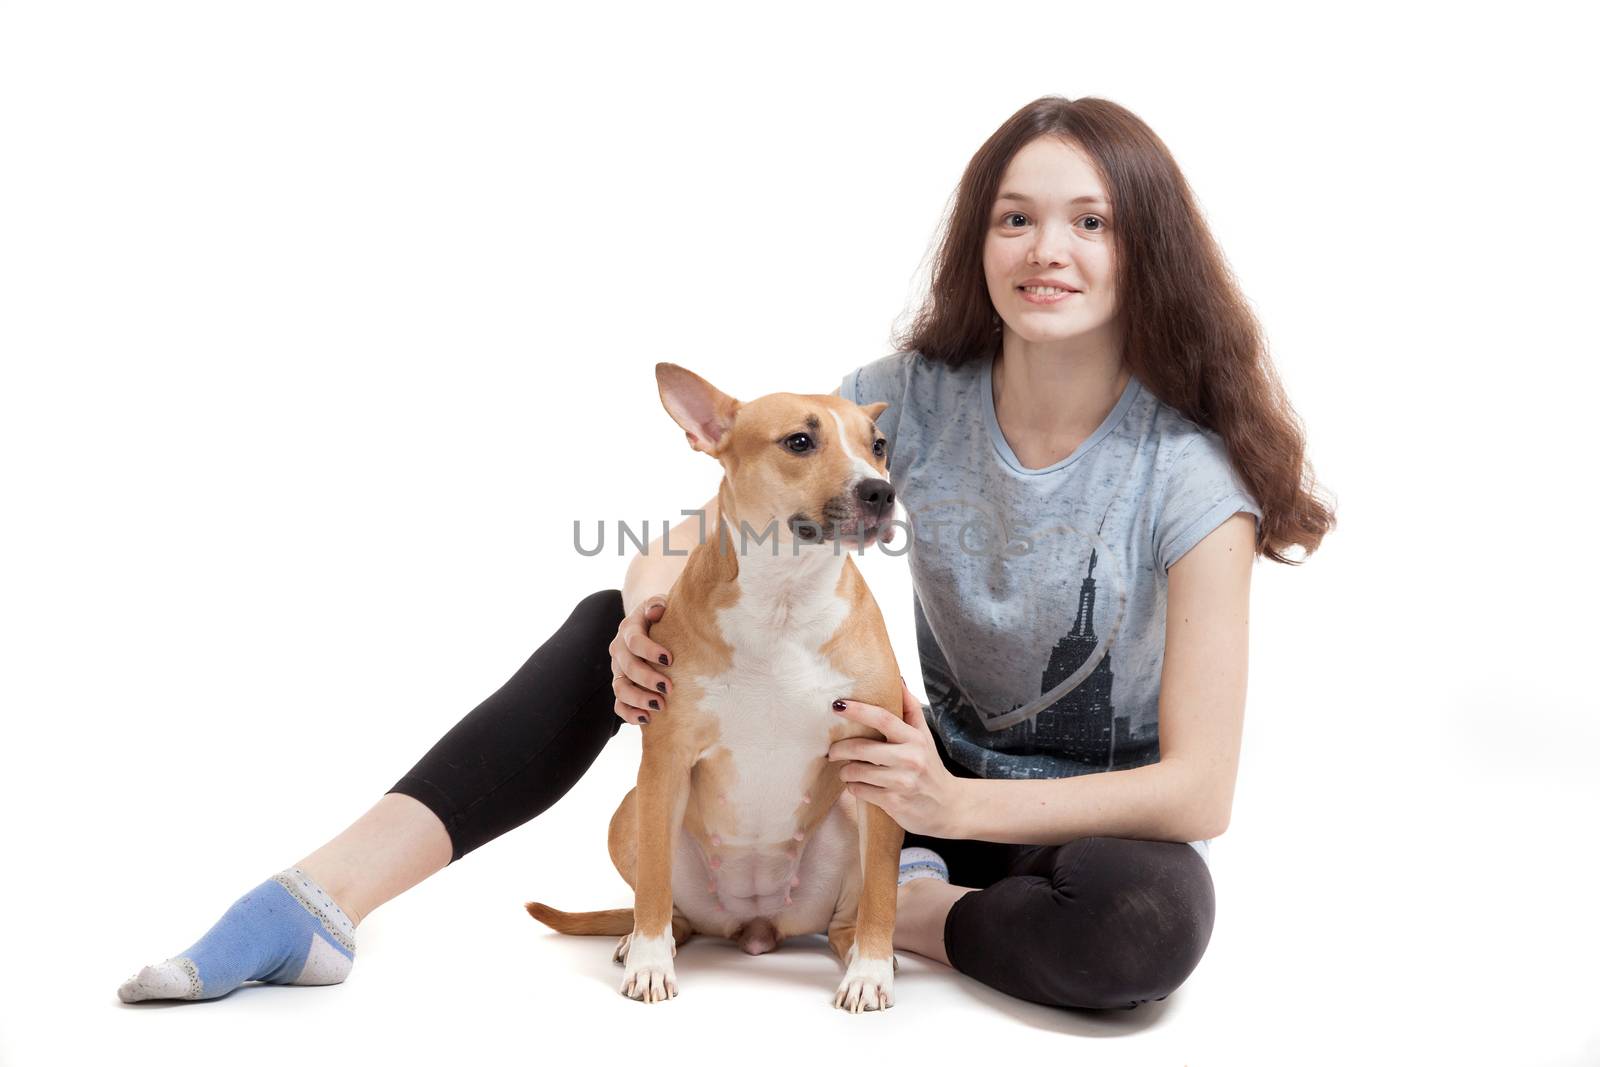 the young beautiful girl embraces a dog